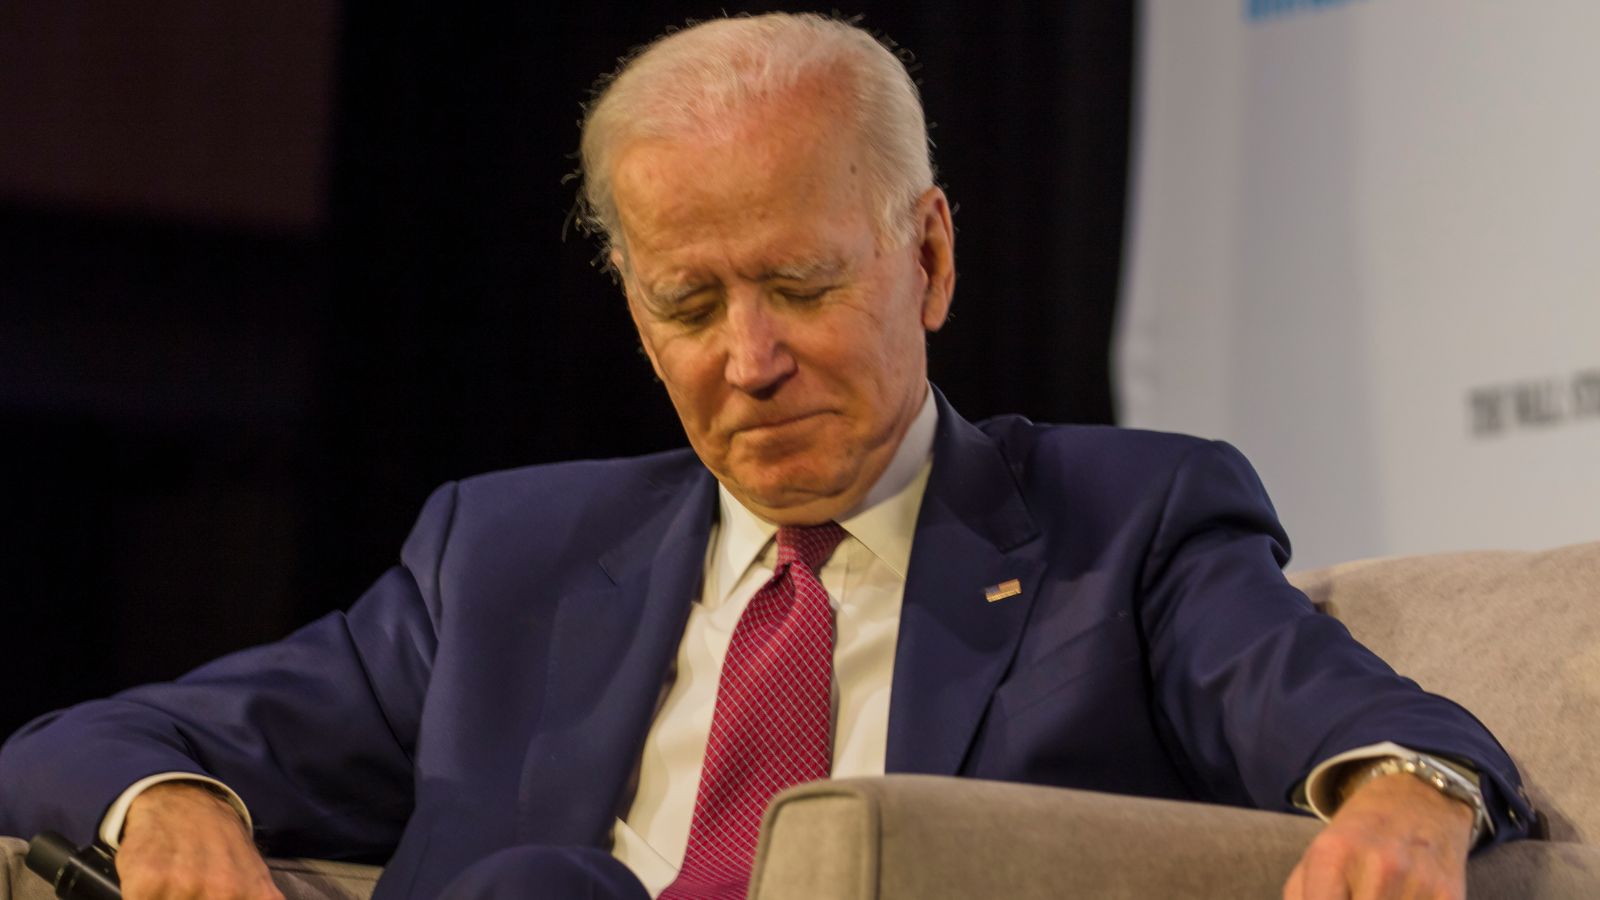 “Republicans Will Do Away With Social Security if Elected”: Biden’s $22.4 Trillion Social Security Plan Unlikely To Pass Due to Congress “MAGA Politicians”